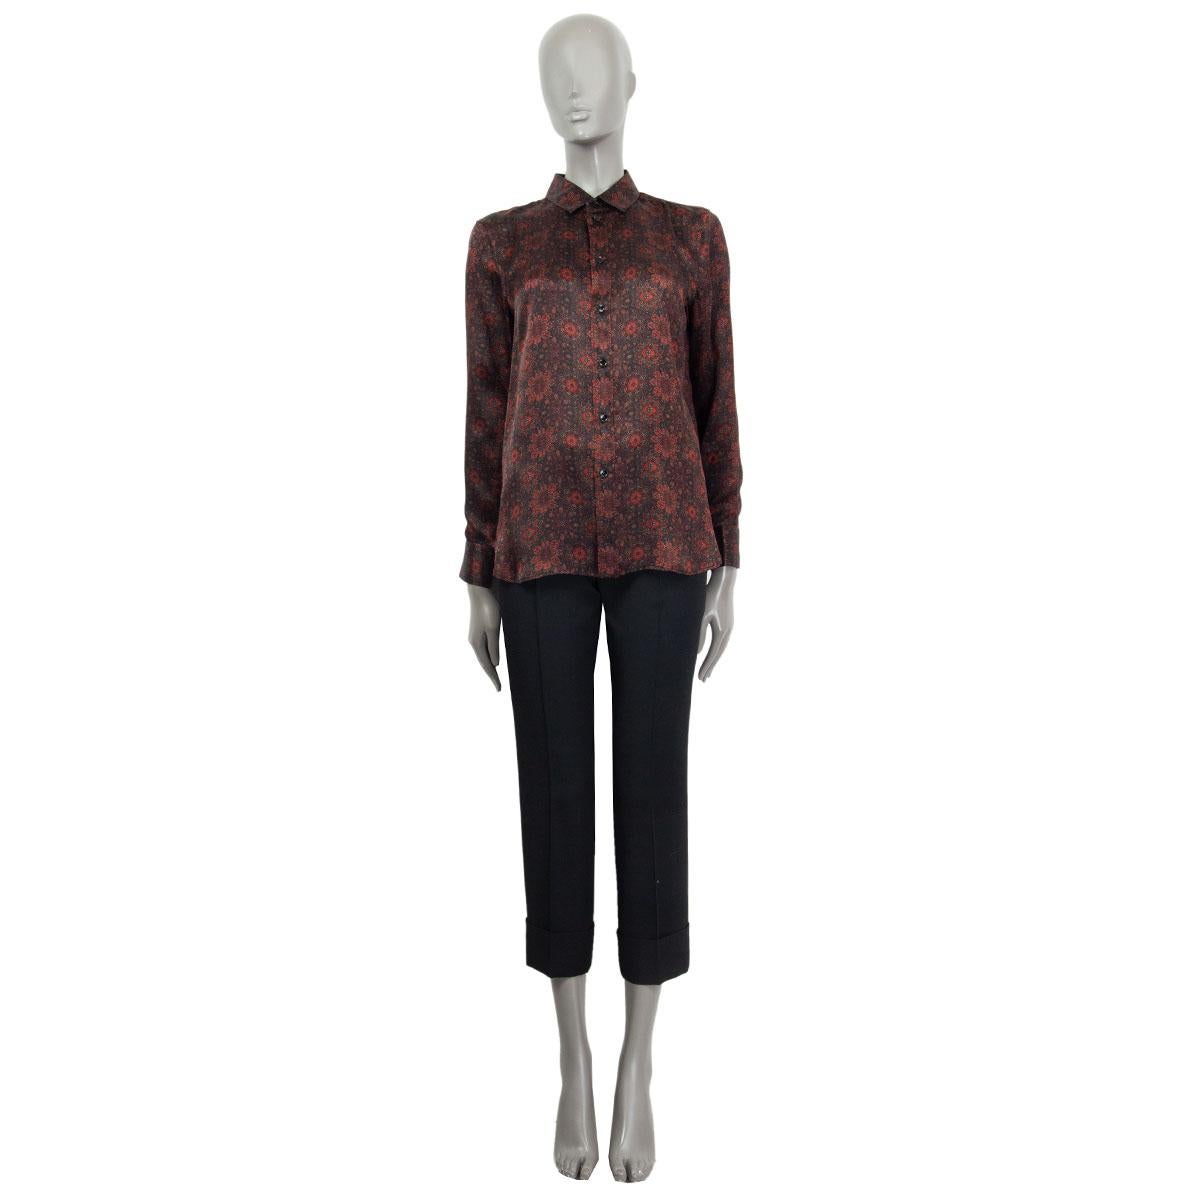 100% authentic Saint Laurent geometric flower-print like blouse in black, brown, orange, red and sage silk (100%) with a classic collar, long sleeves and a rounded hemline. Closes with button fastening in the front. Has been worn and is in excellent